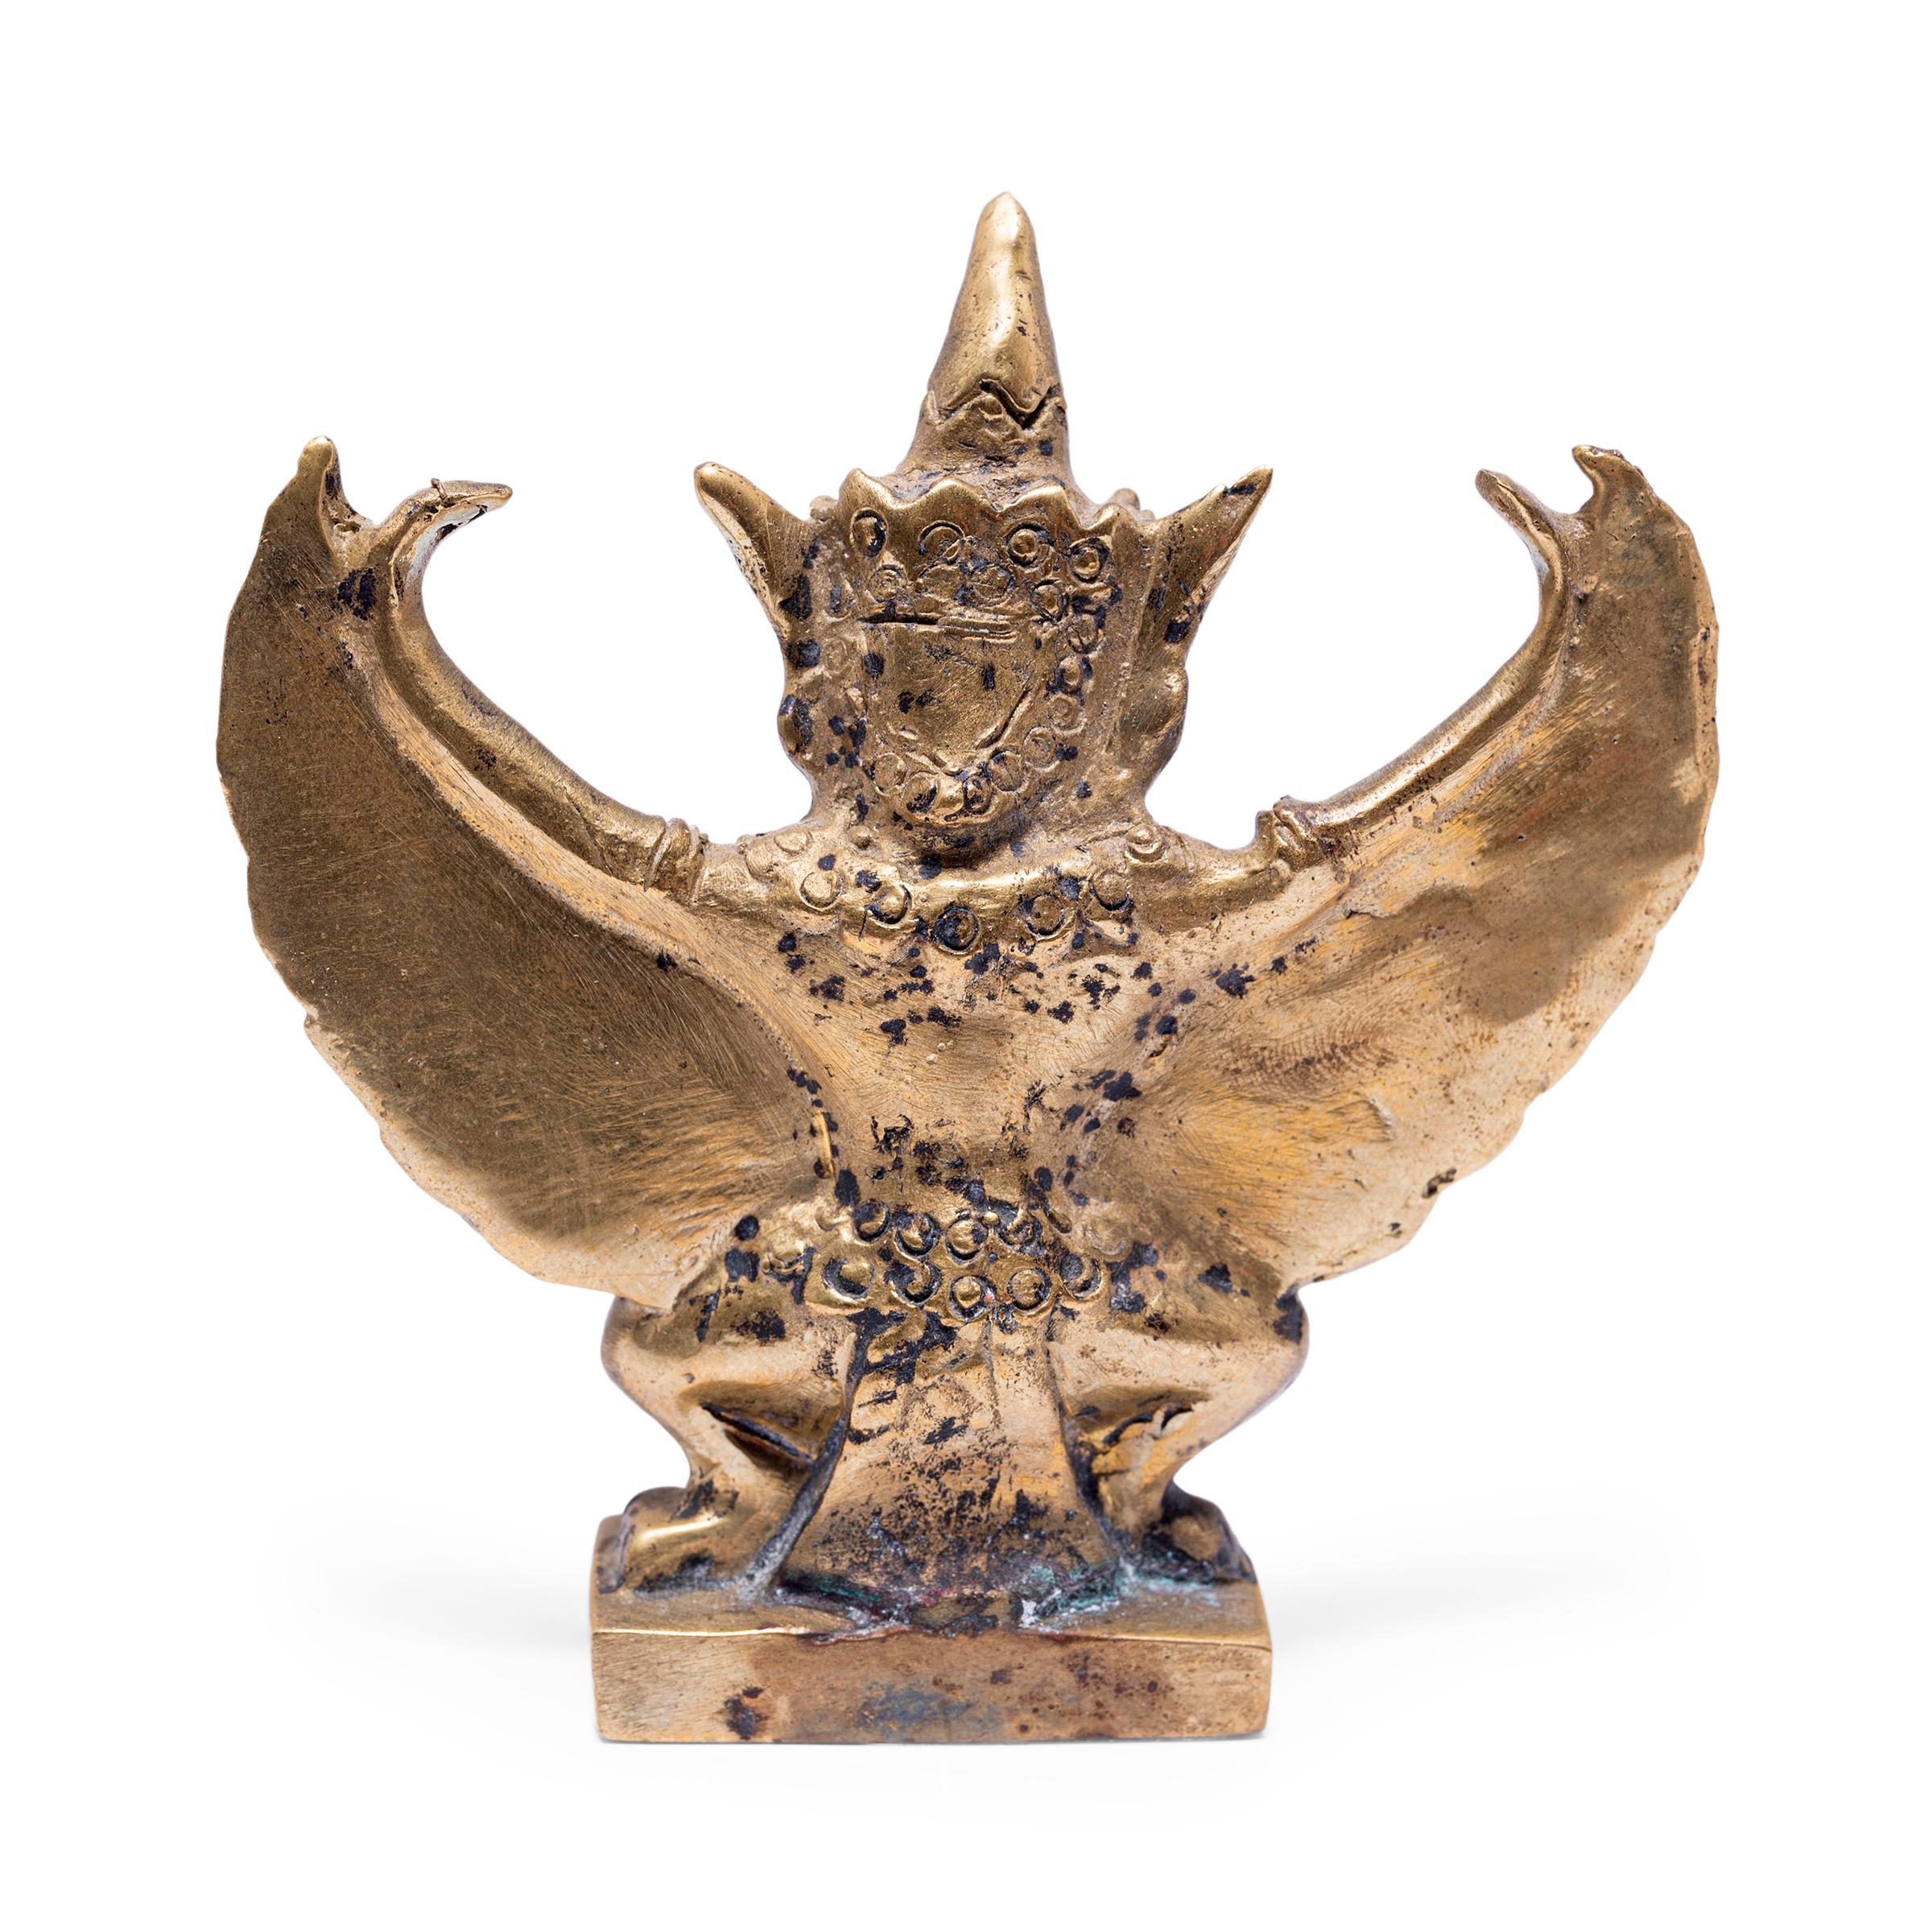 This petite bronze figurine is cast in the form of Garuda, a demigod and mythical king of birds in Hindu and Buddhist faith. Taking the form of half-bird half man, Garuda is a powerful protector and ever-watchful enemy of the serpent. Garuda is